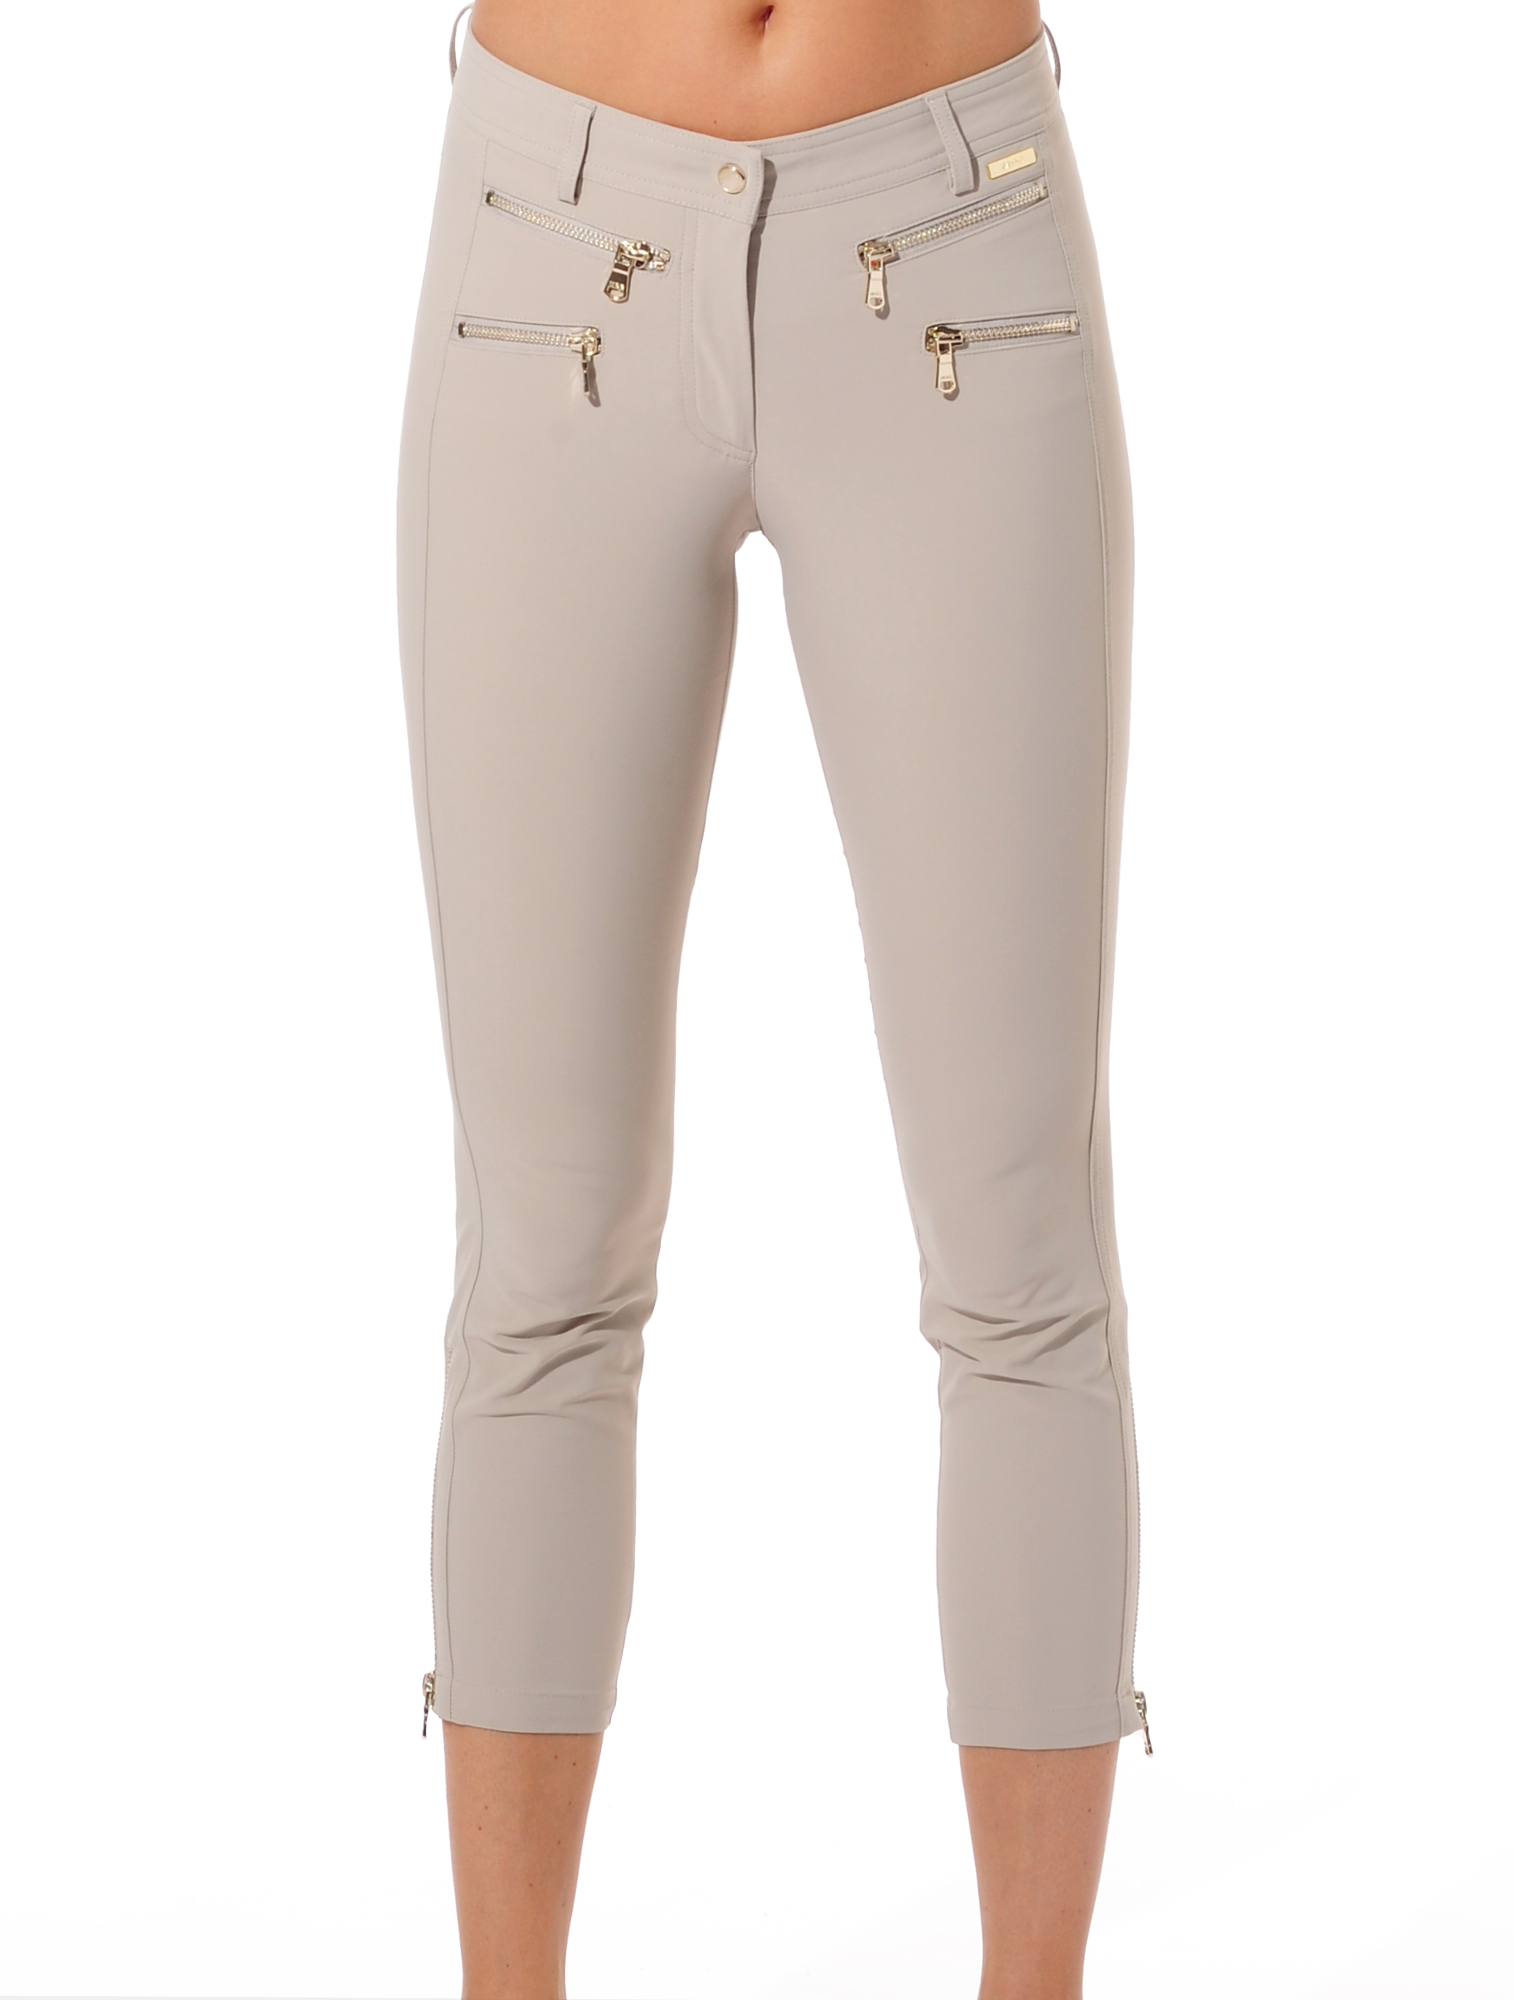 4way stretch double zip cropped pants light taupe 